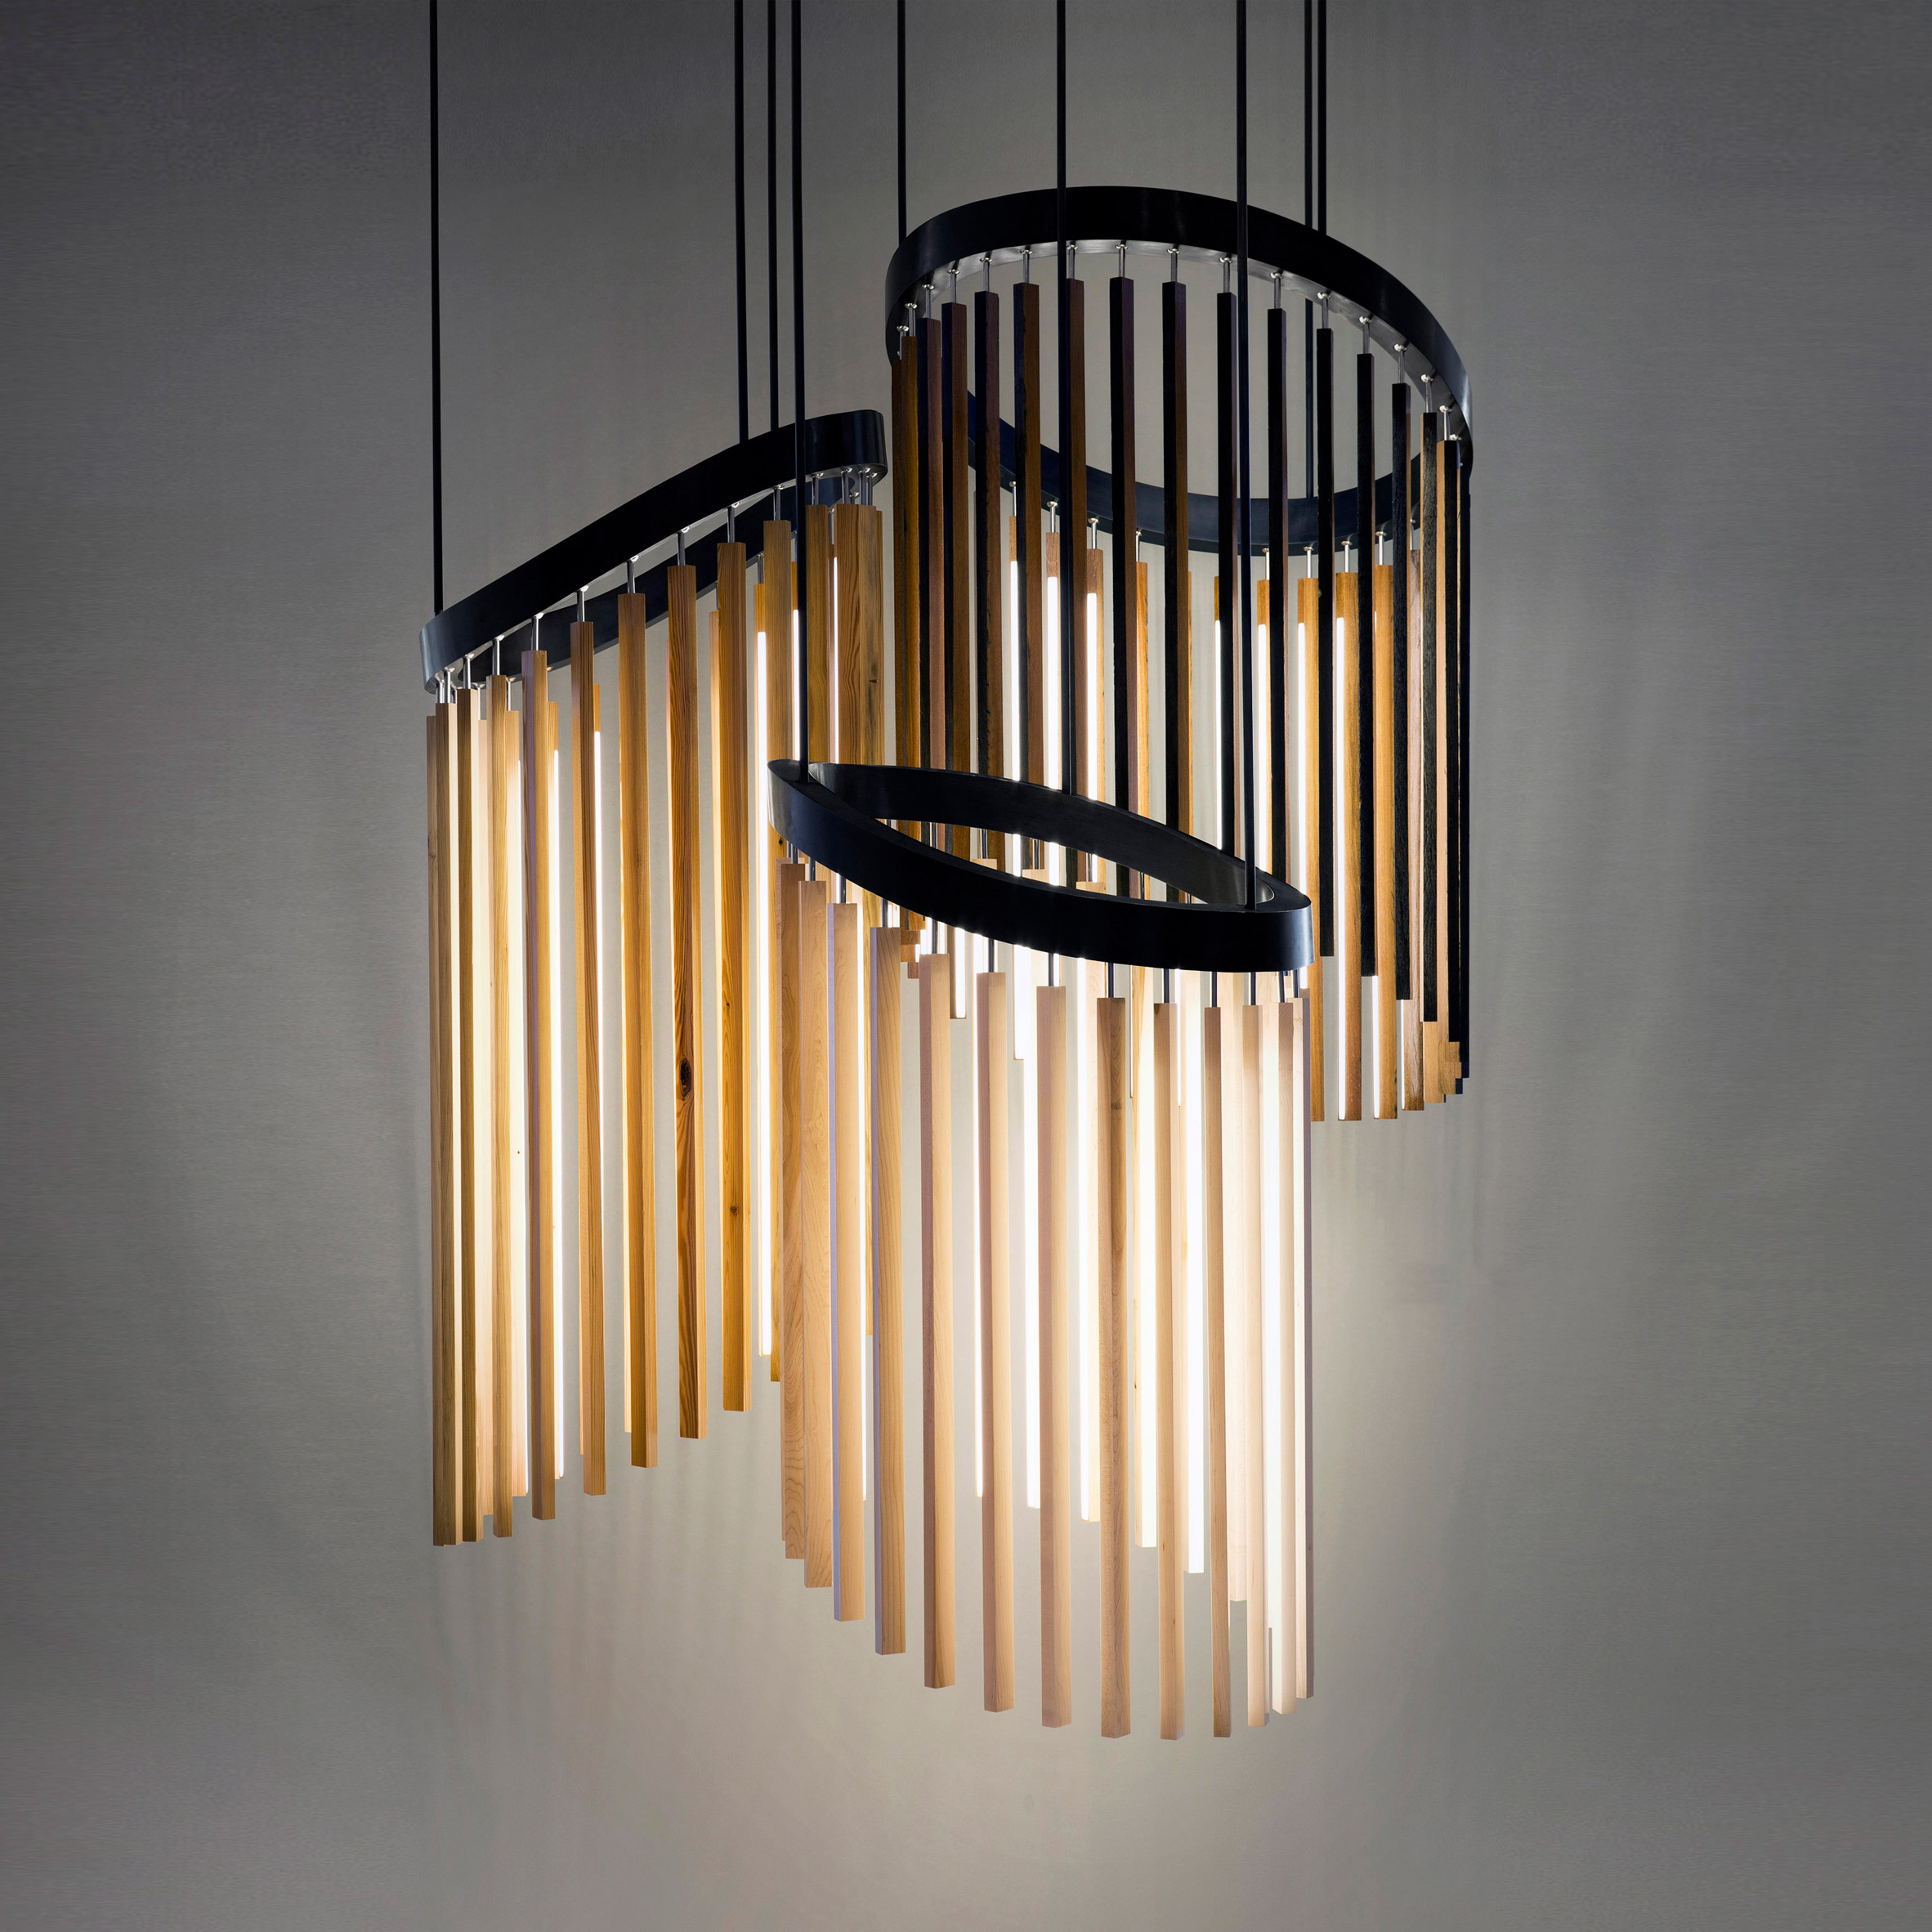 Chime lighting collection by Stickbulb